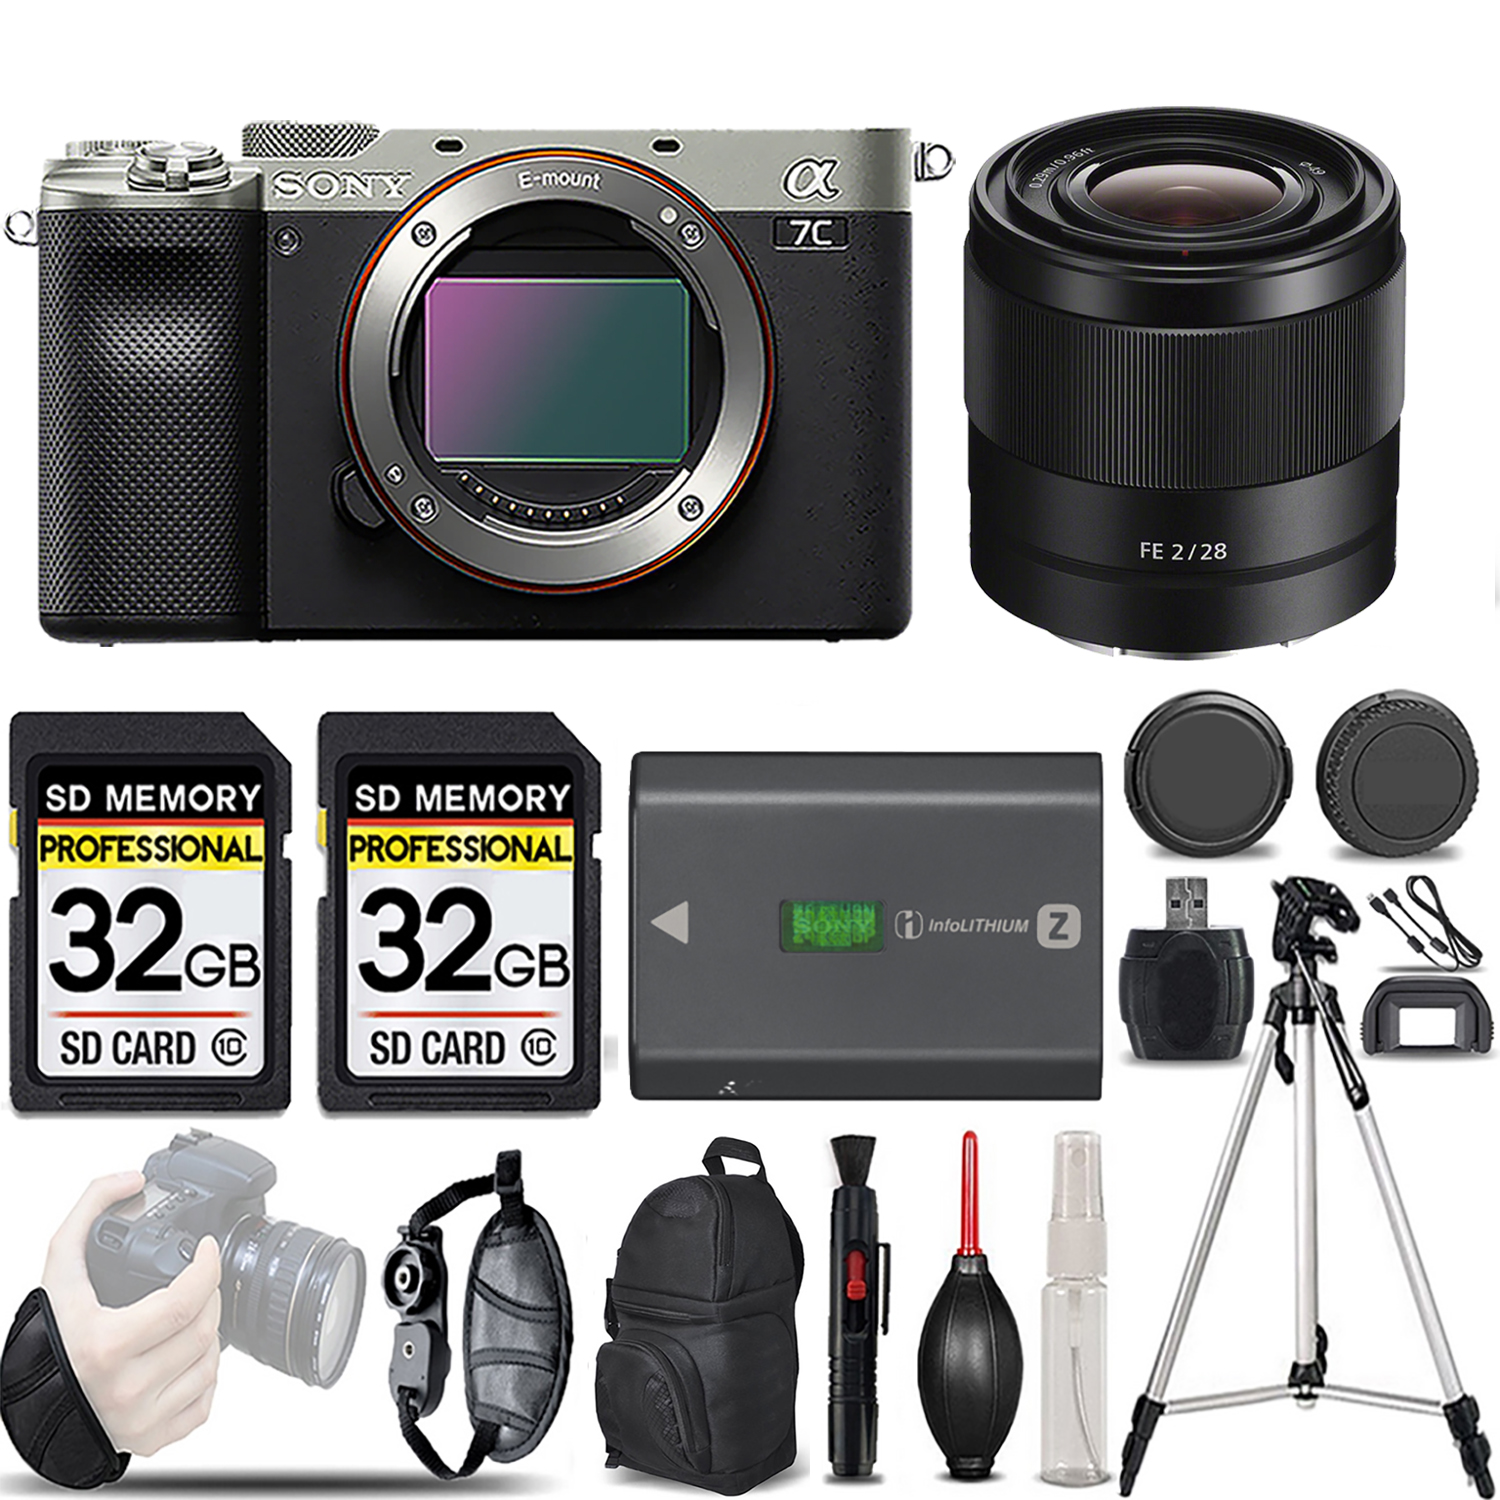 a7C Camera (Silver)  +28mm f/2 Lens +Extra Battery+ 64GB -Basic Kit *FREE SHIPPING*